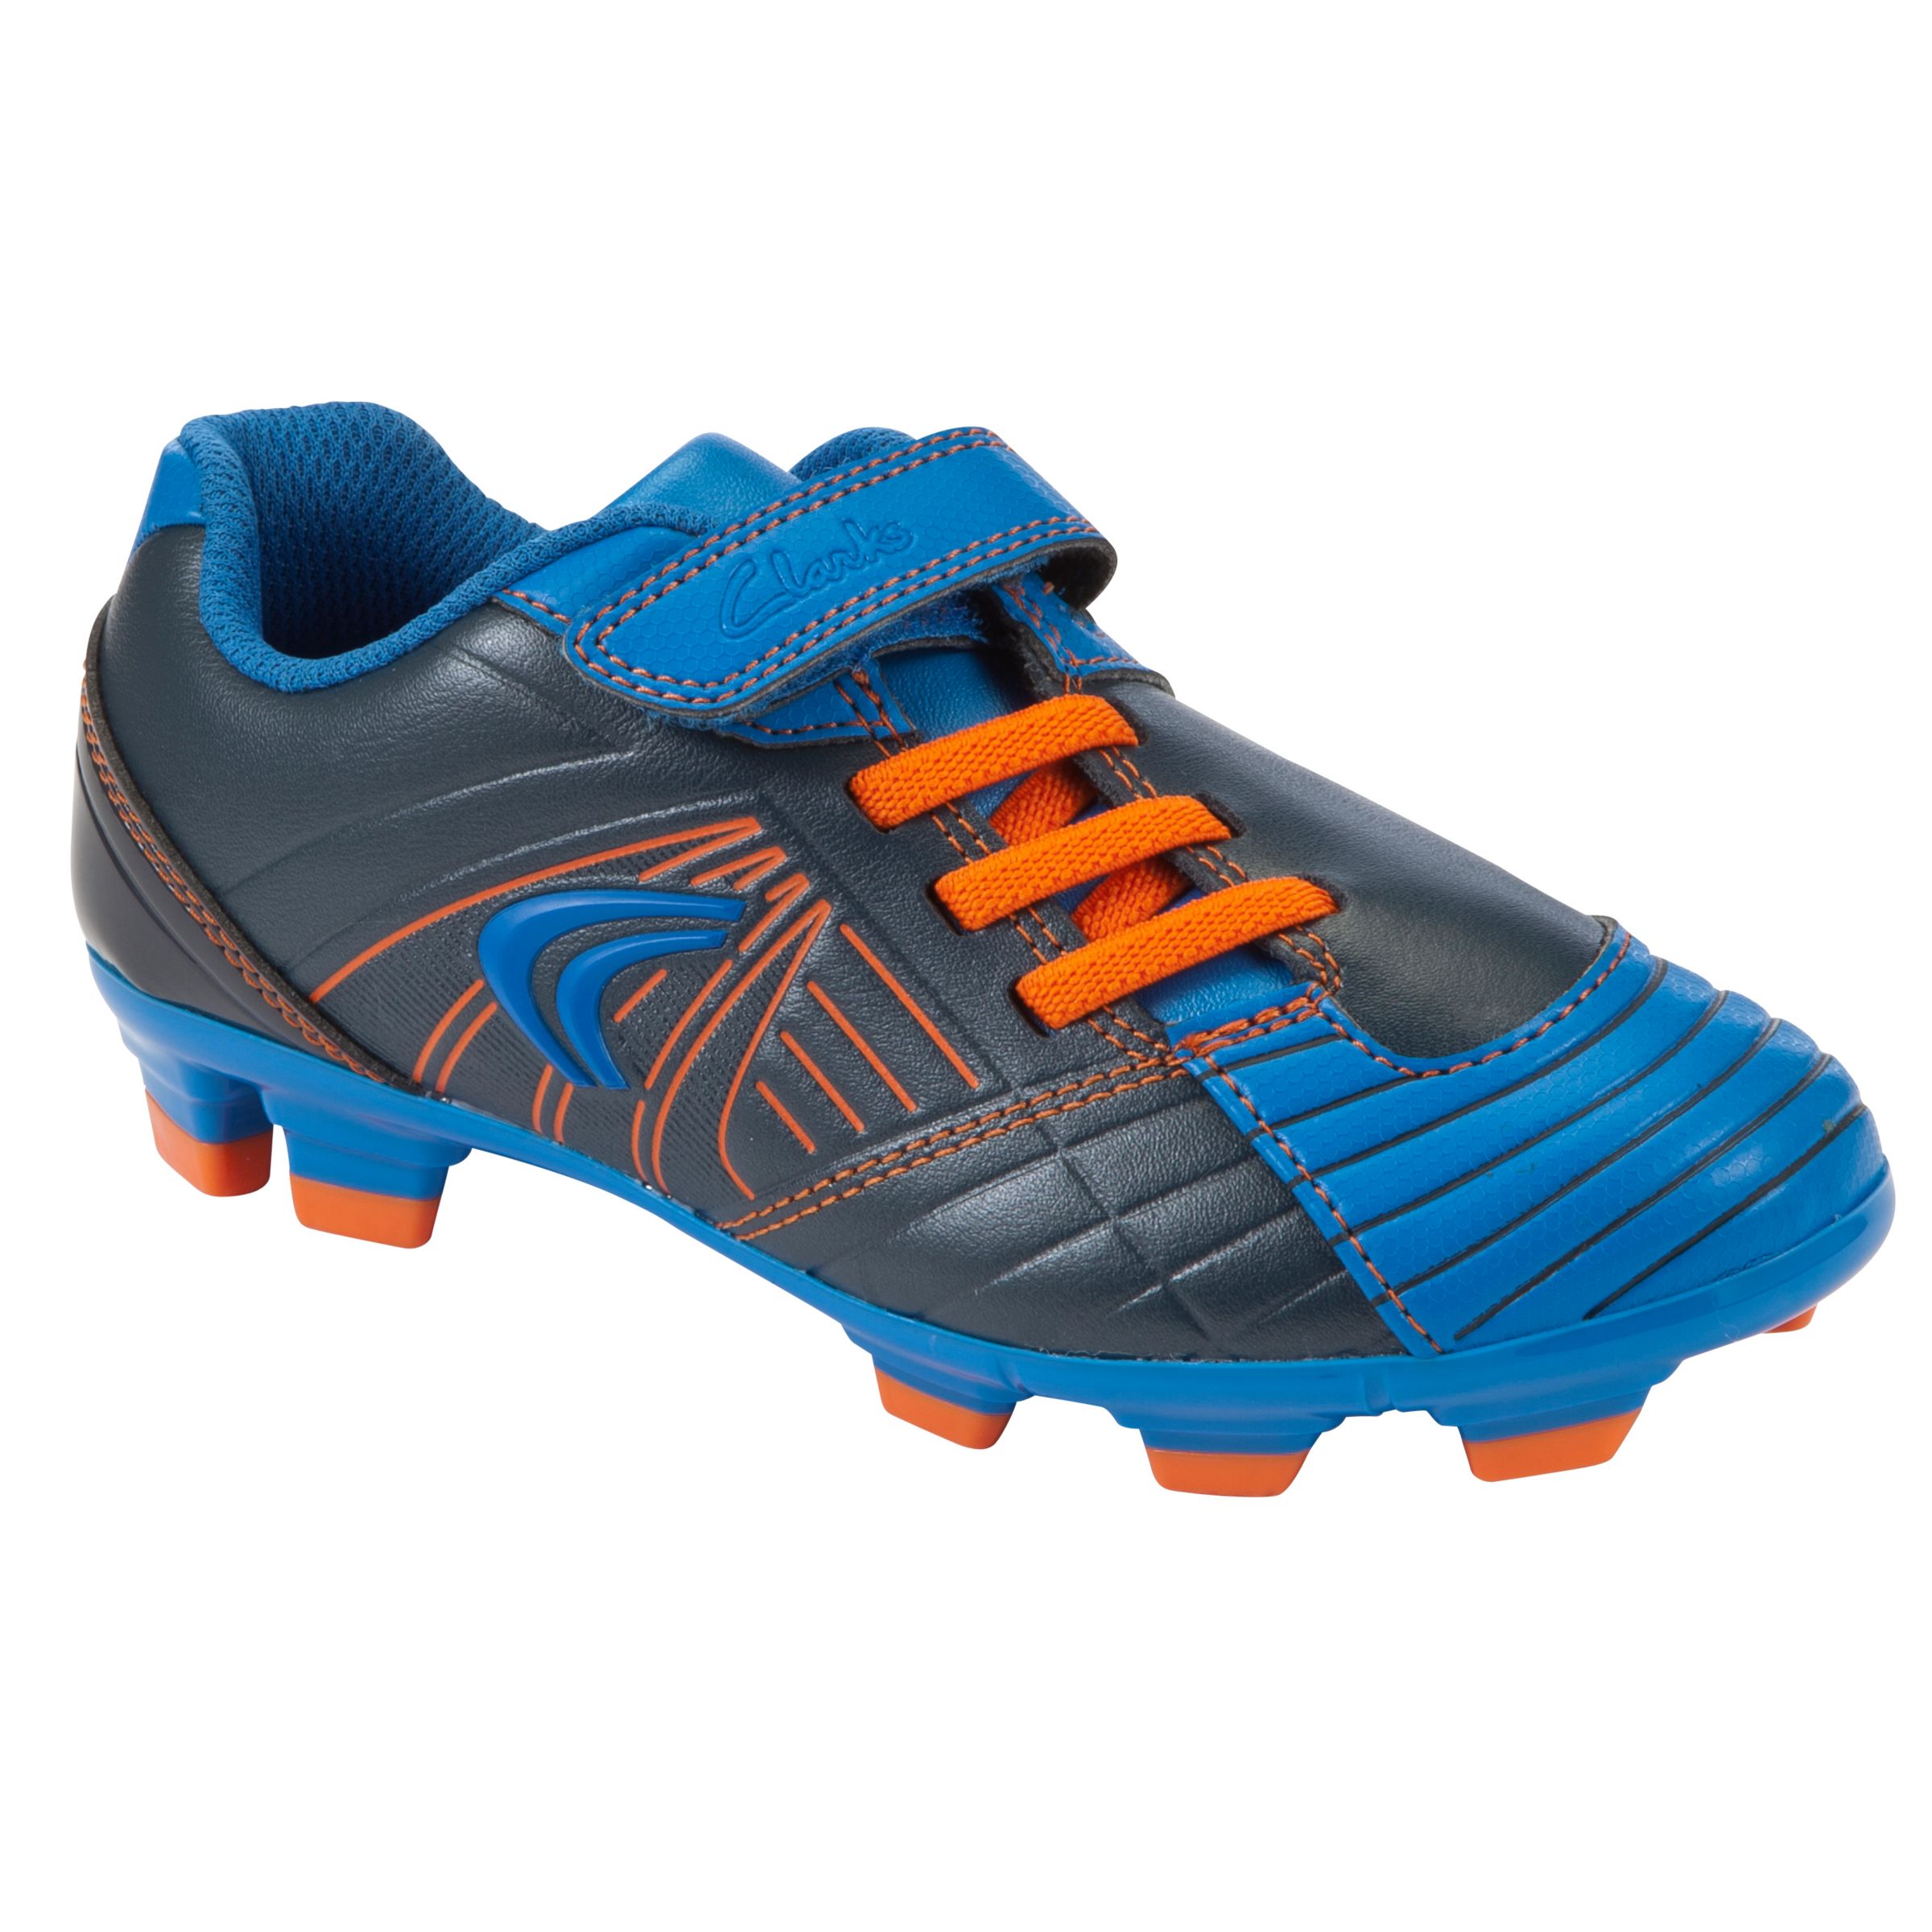 clarks football shoes off 77% - online 